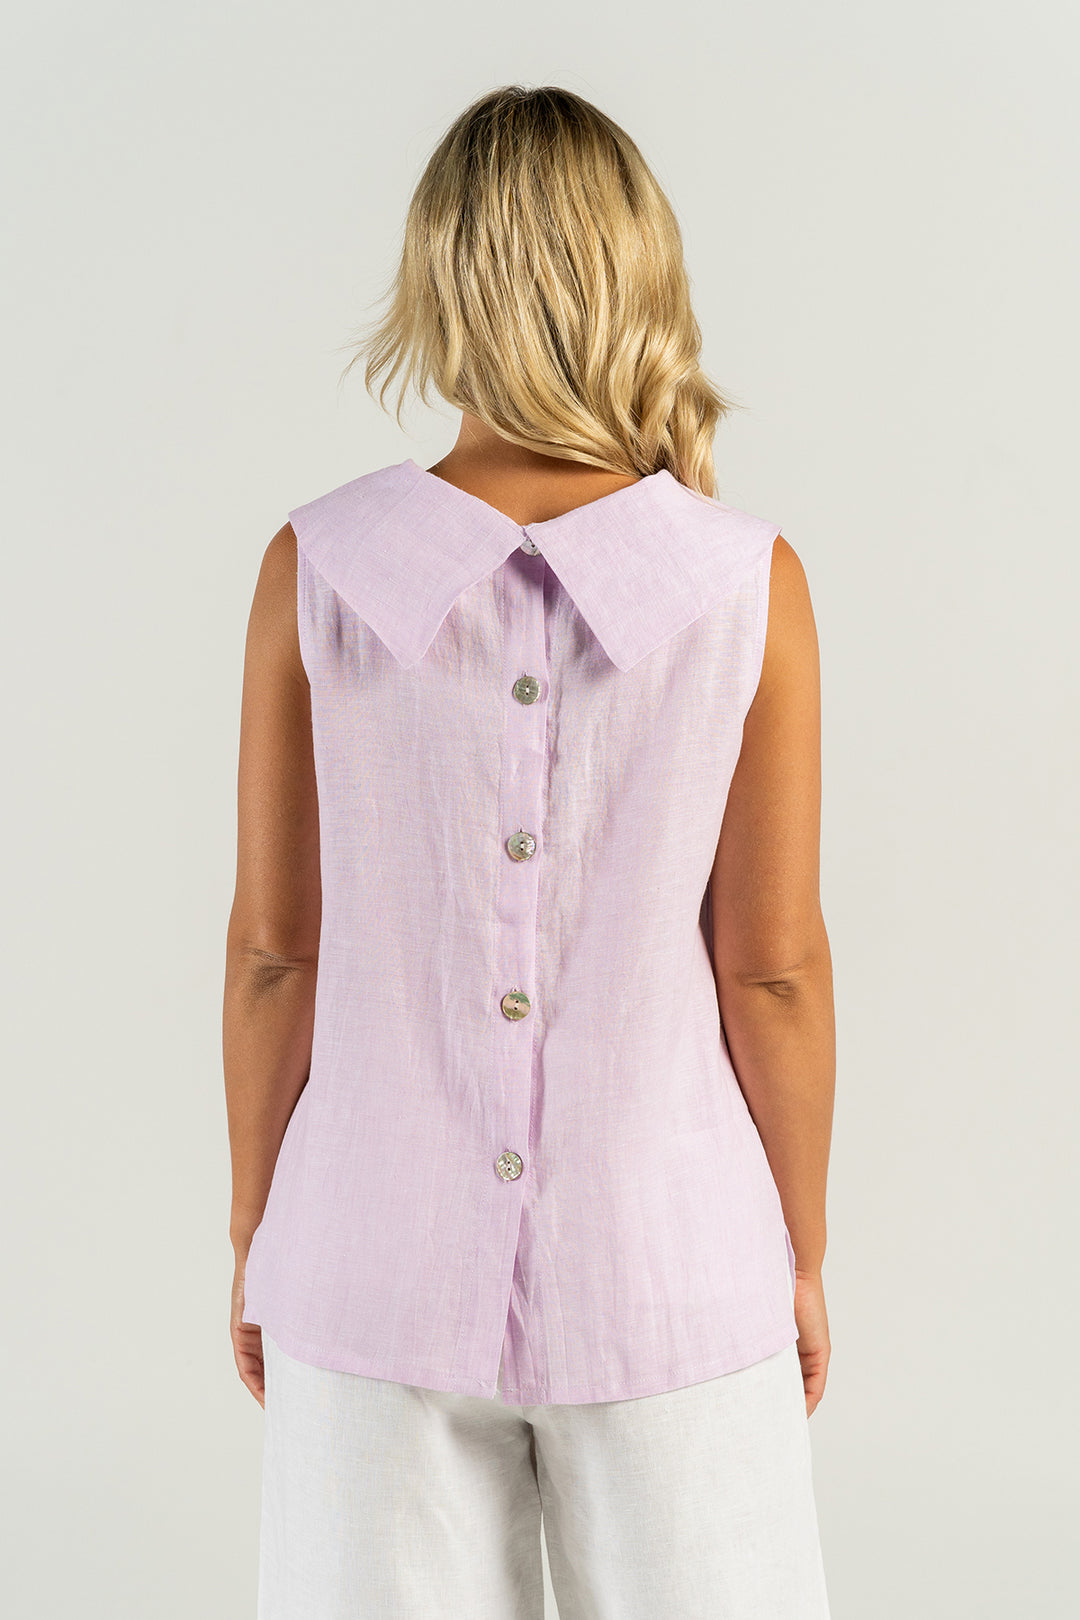 Woman wearing a cowl neck top in pink lilly by See Saw clothing, sold and shipped from Pizazz Boutique Nelson Bay online women's clothes shops Australia back view